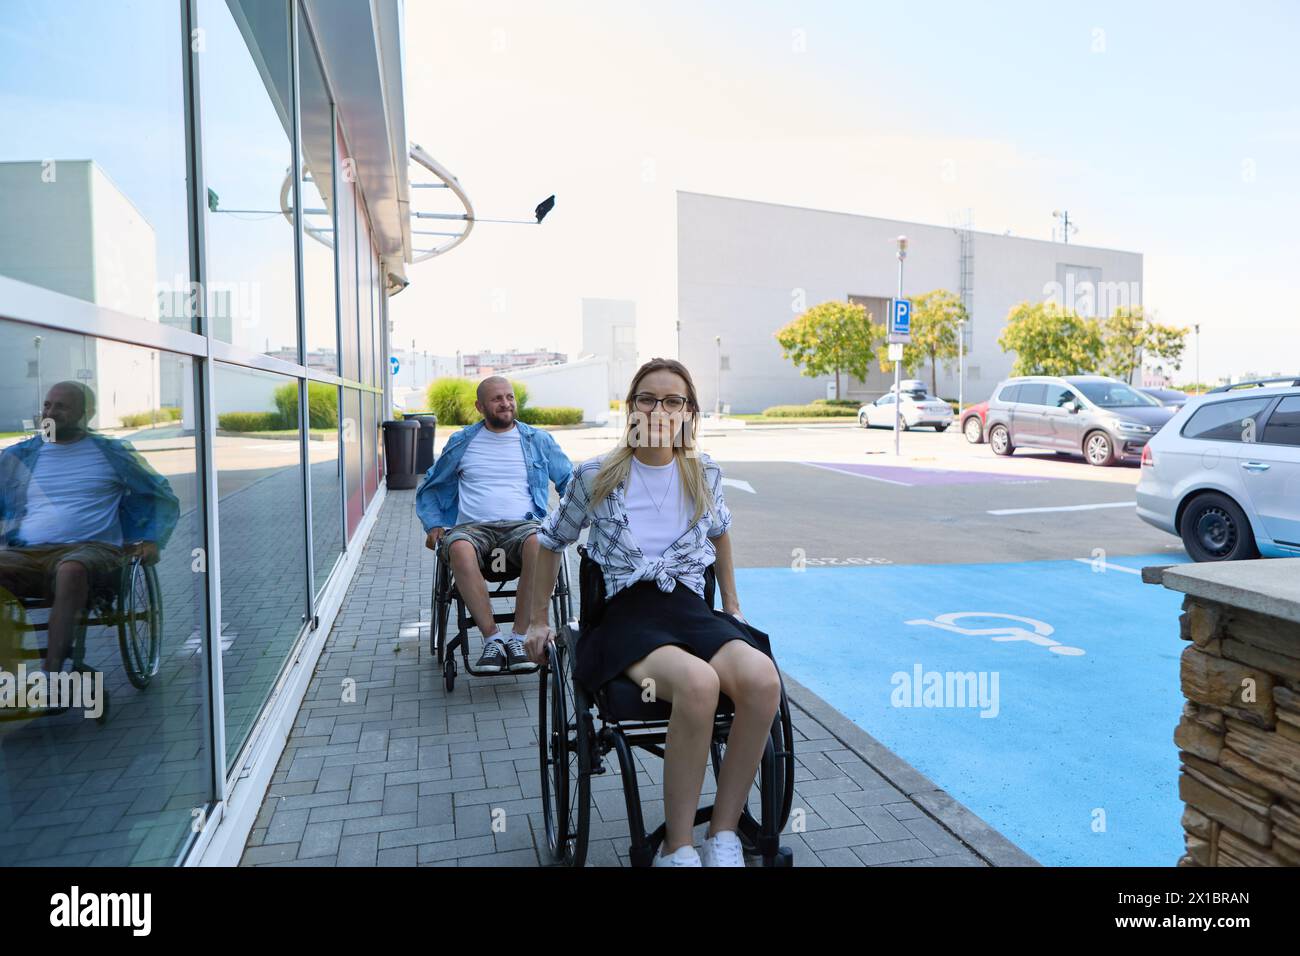 An image capturing two people in wheelchairs, a man and woman, outside a building on a sunny day, showcasing accessibility and mobility. Stock Photo